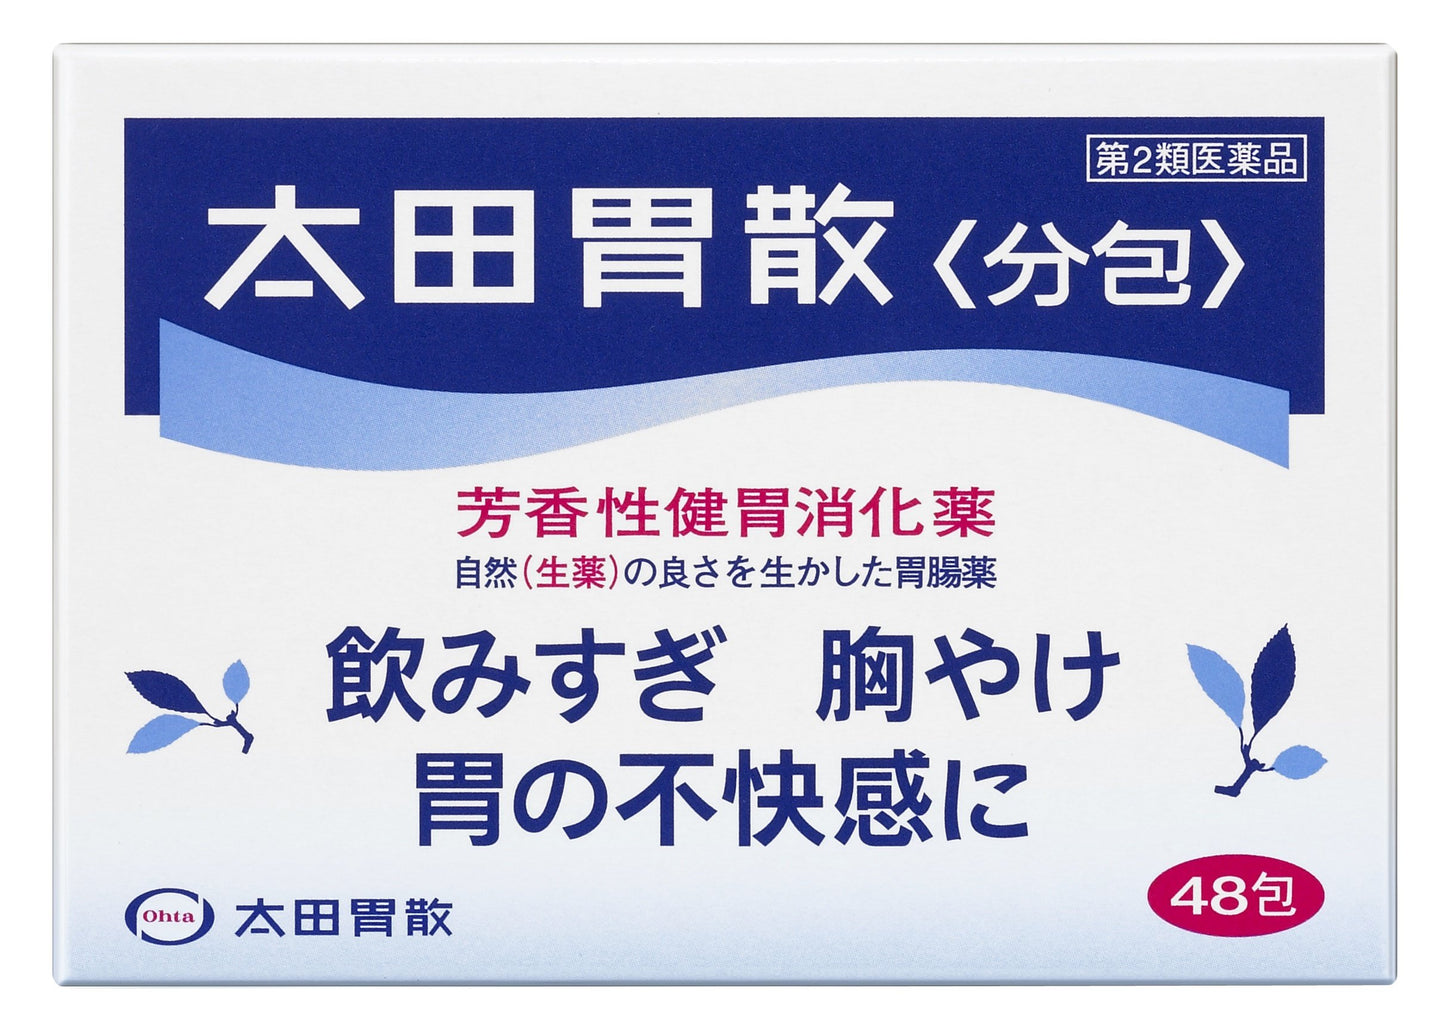 Ohta stomach powder <sub-package> 48 packs